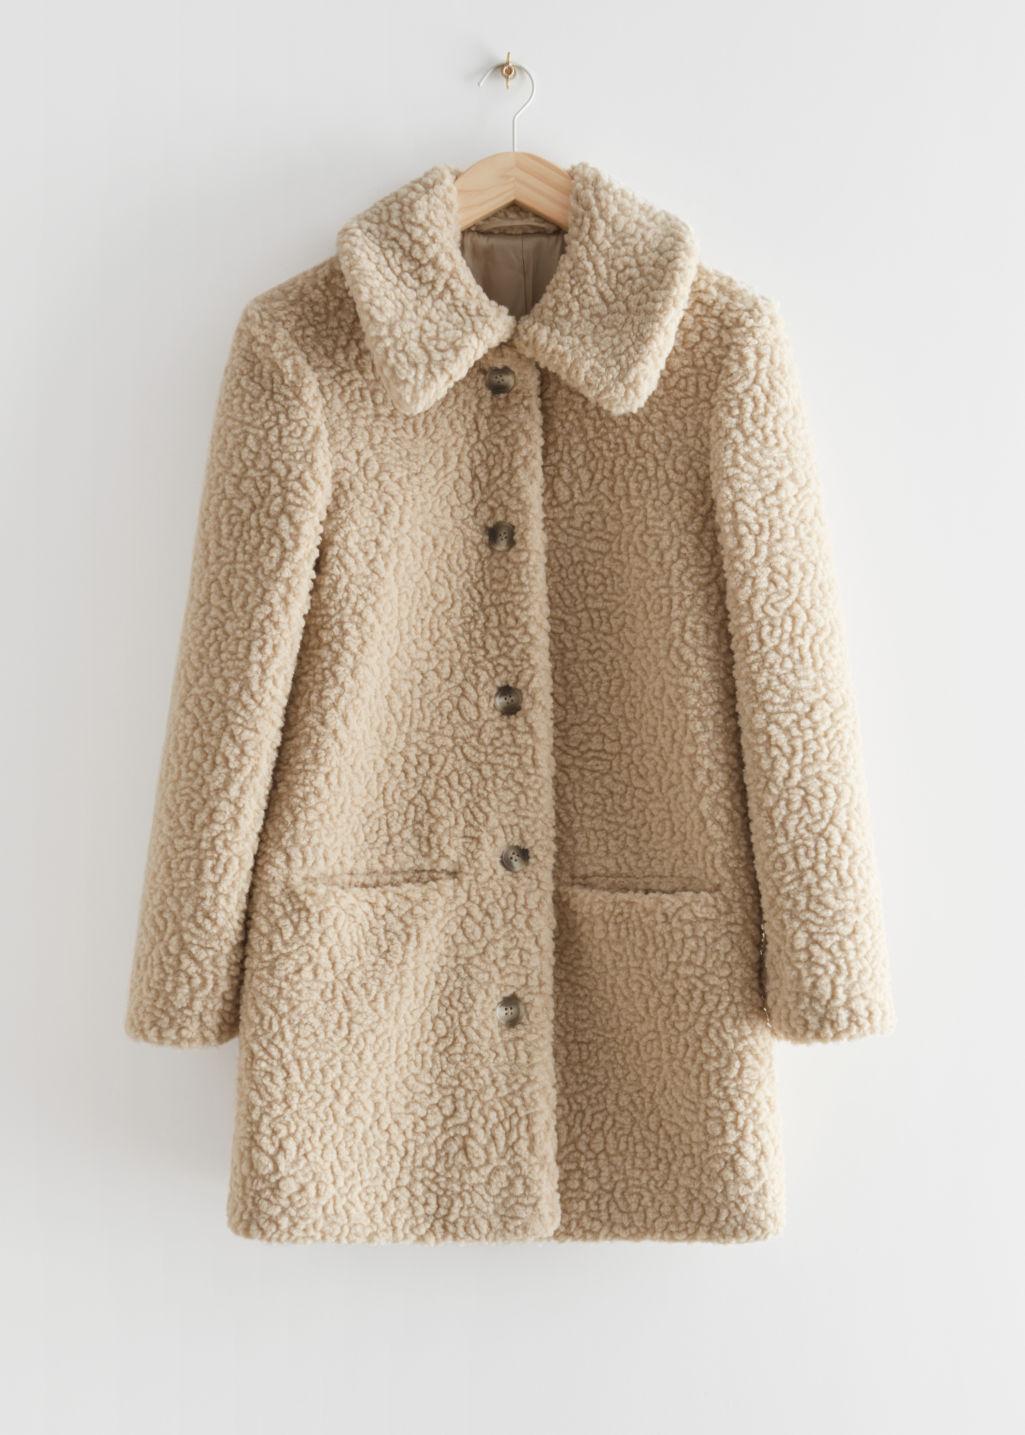 & Other Stories Faux Shearling Coat |